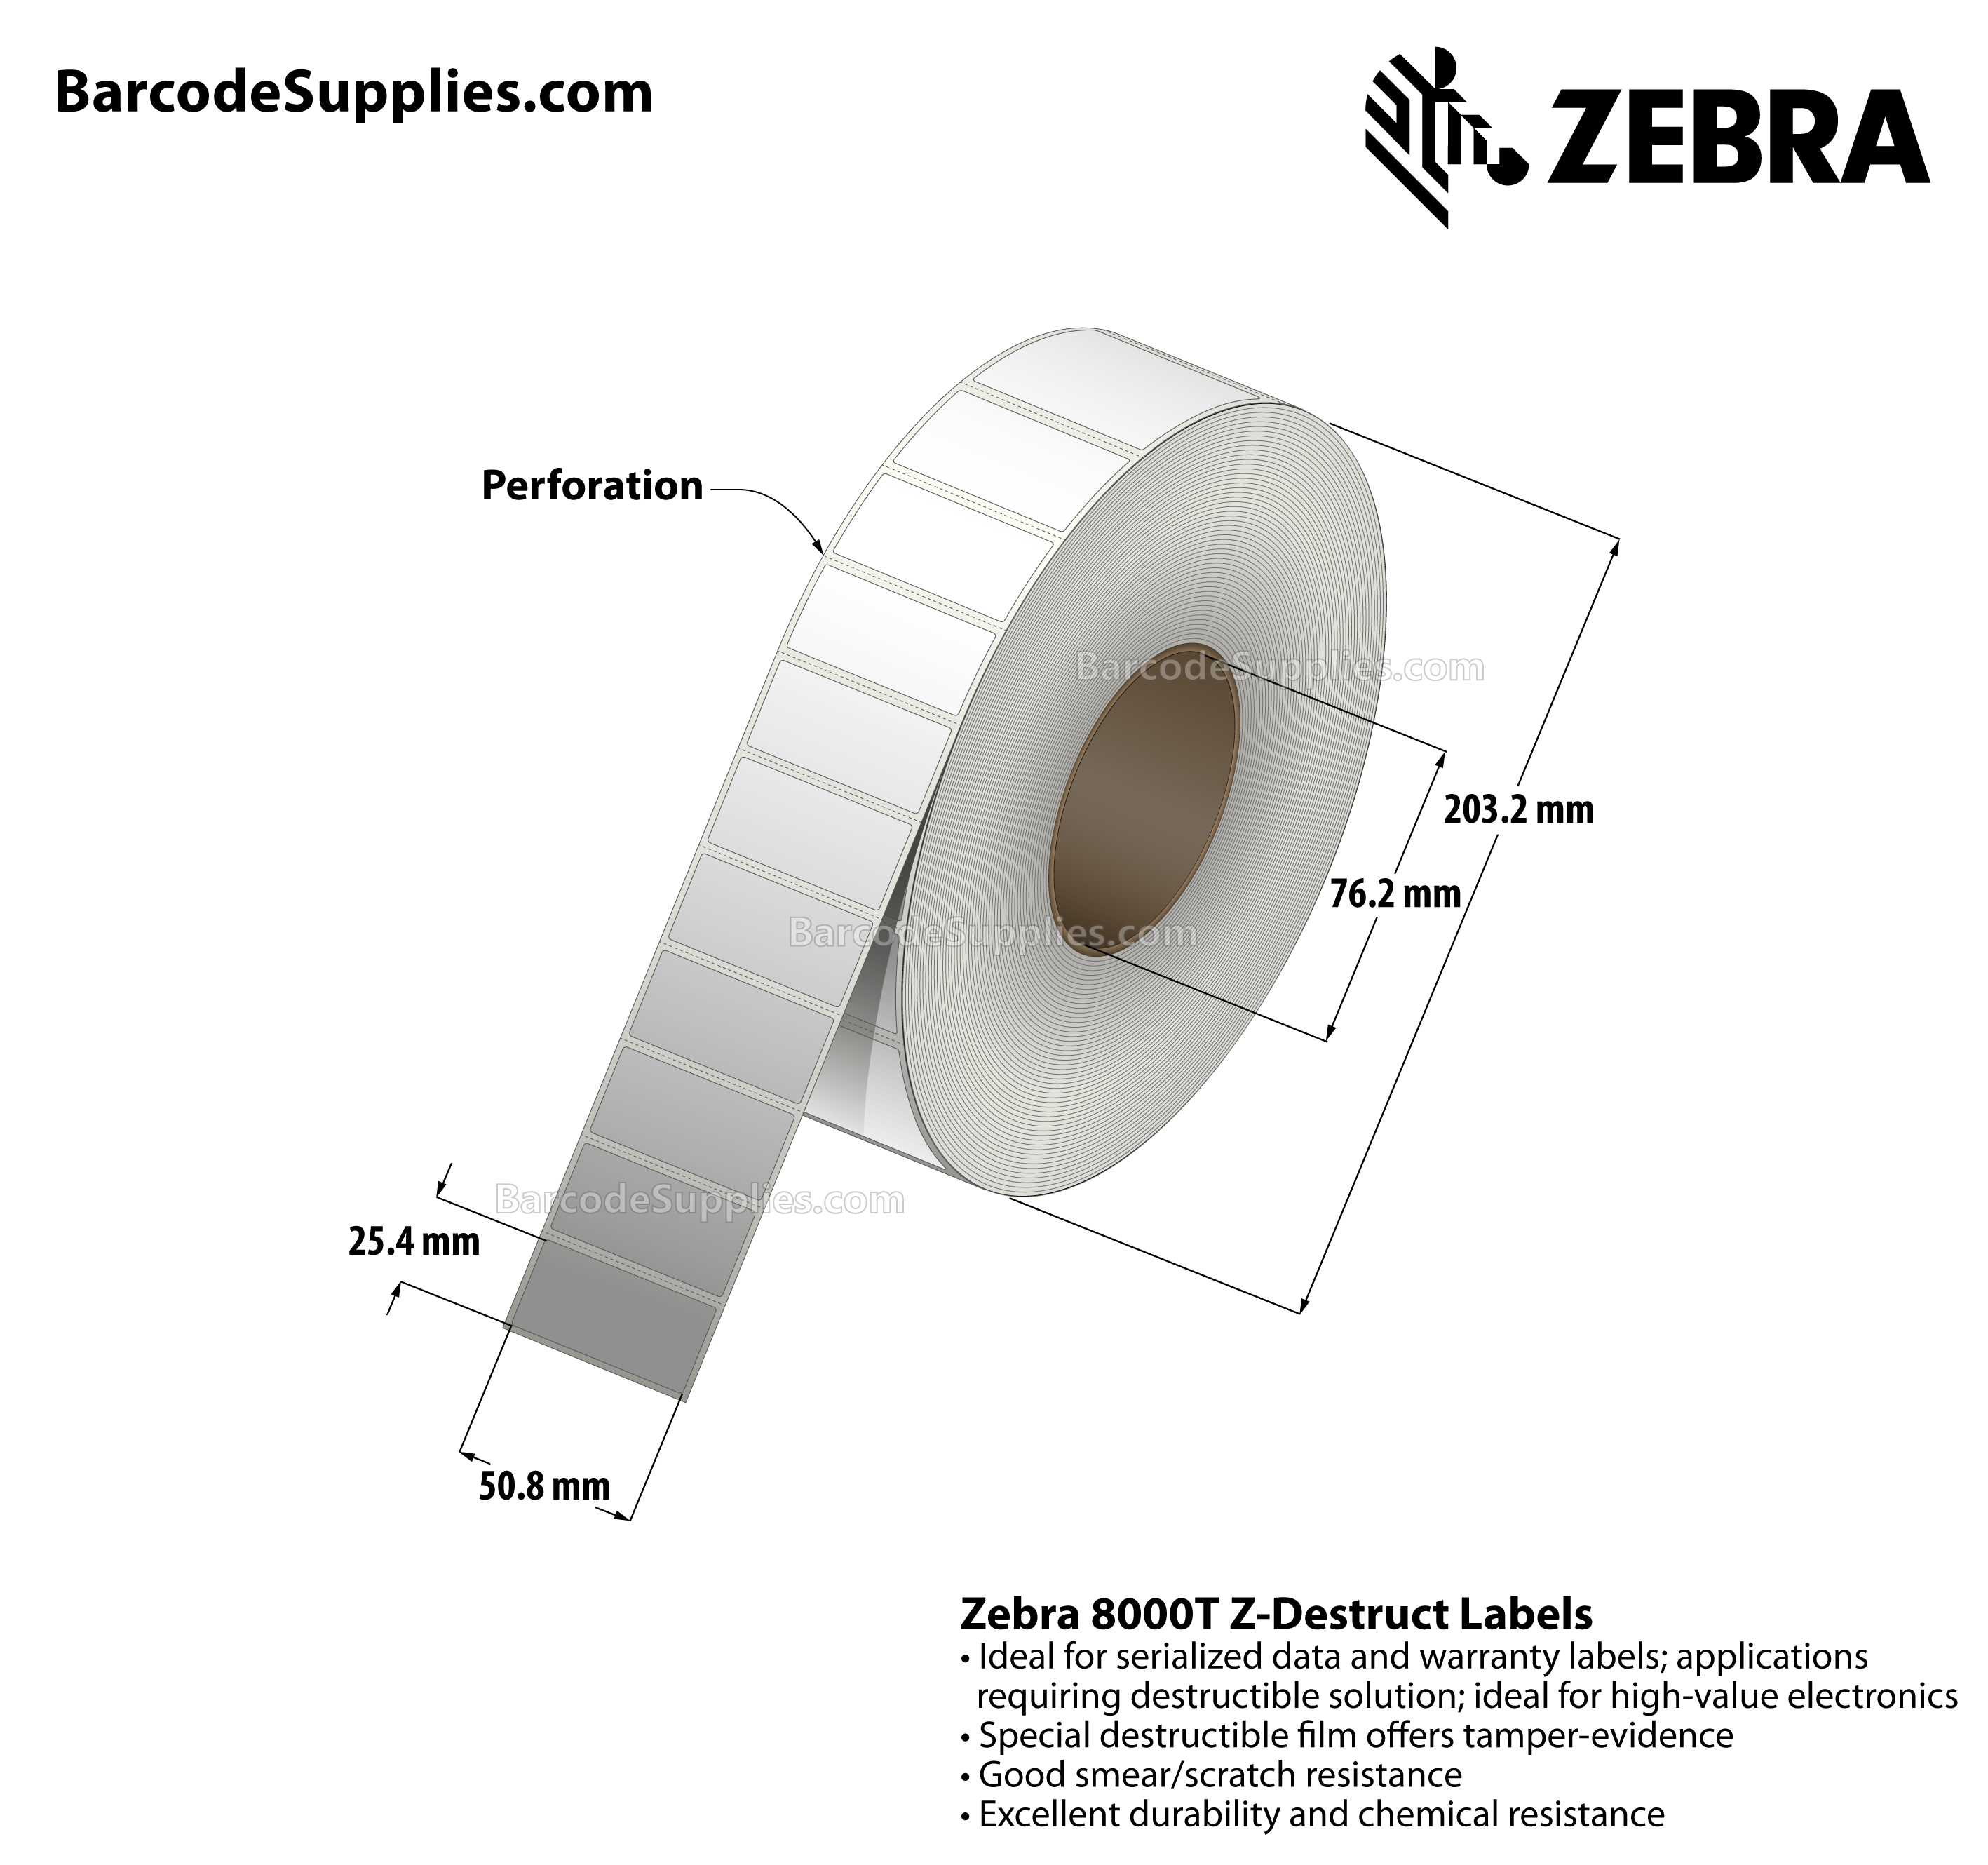 2 x 1 Thermal Transfer White 8000T Z-Destruct Labels With Tamper-evident Adhesive - Perforated - 3000 Labels Per Roll - Carton Of 1 Rolls - 3000 Labels Total - MPN: 10022927